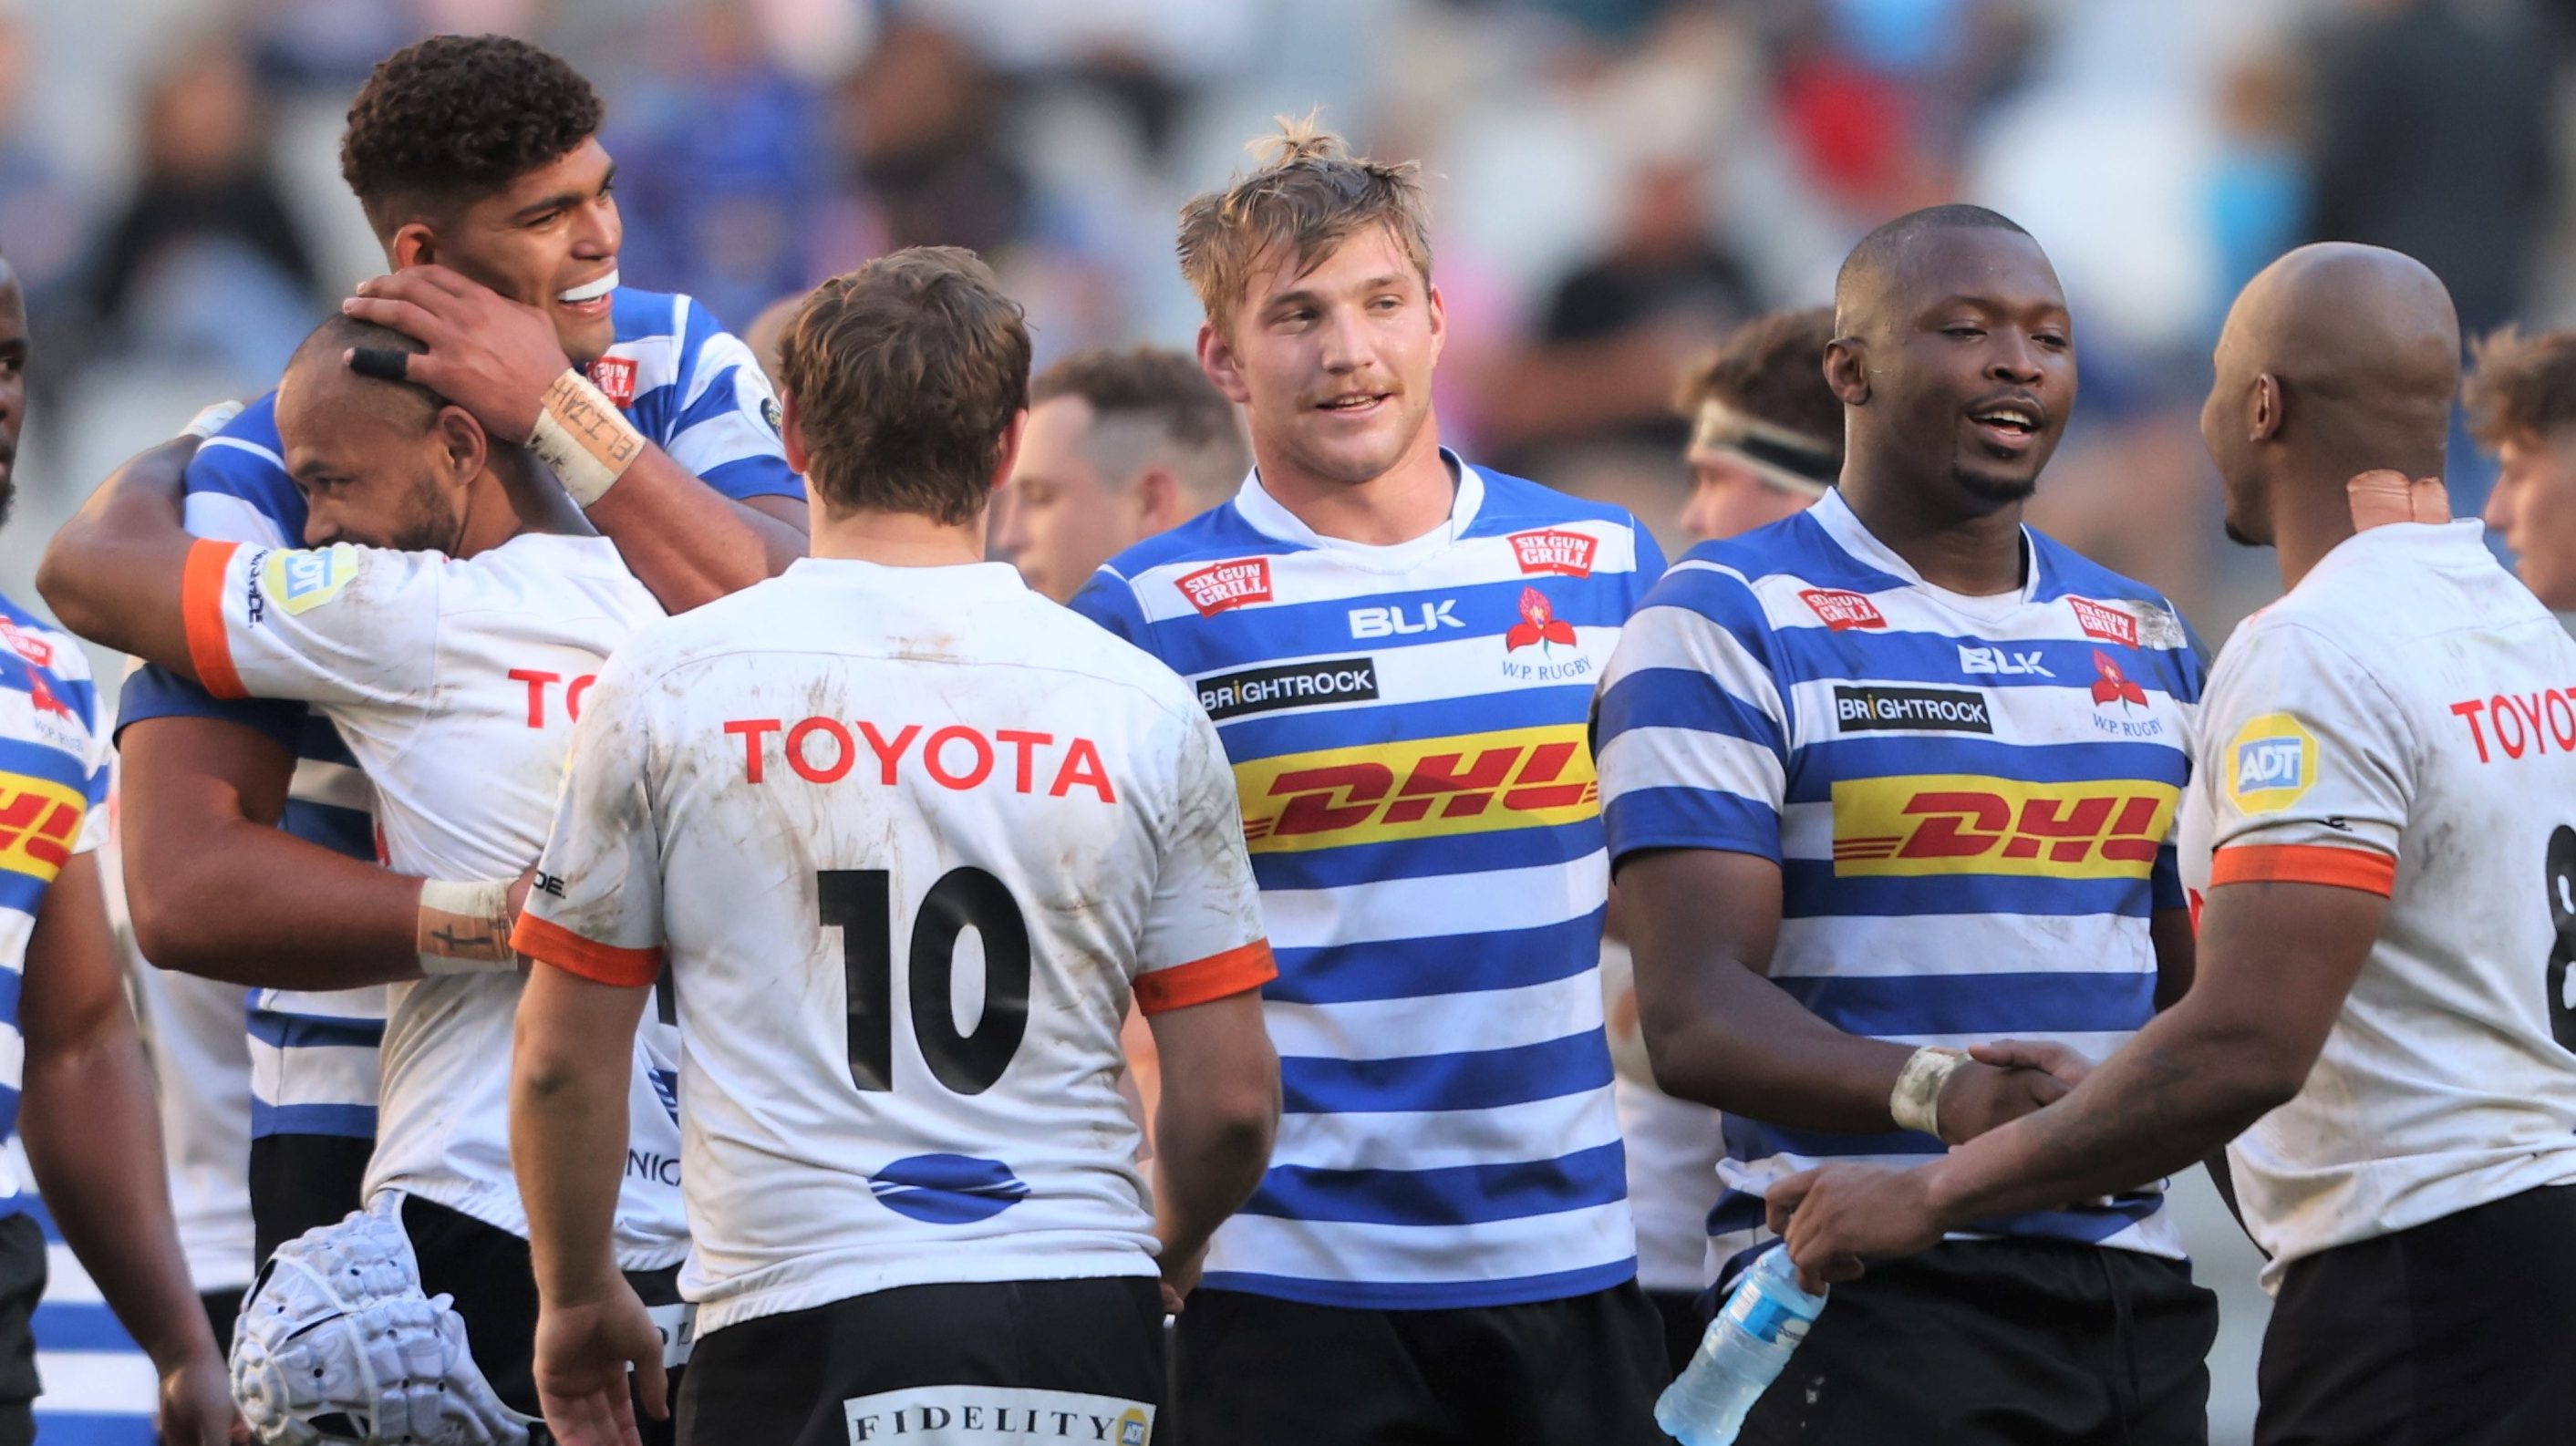 Cheetahs and Western Province players embrace